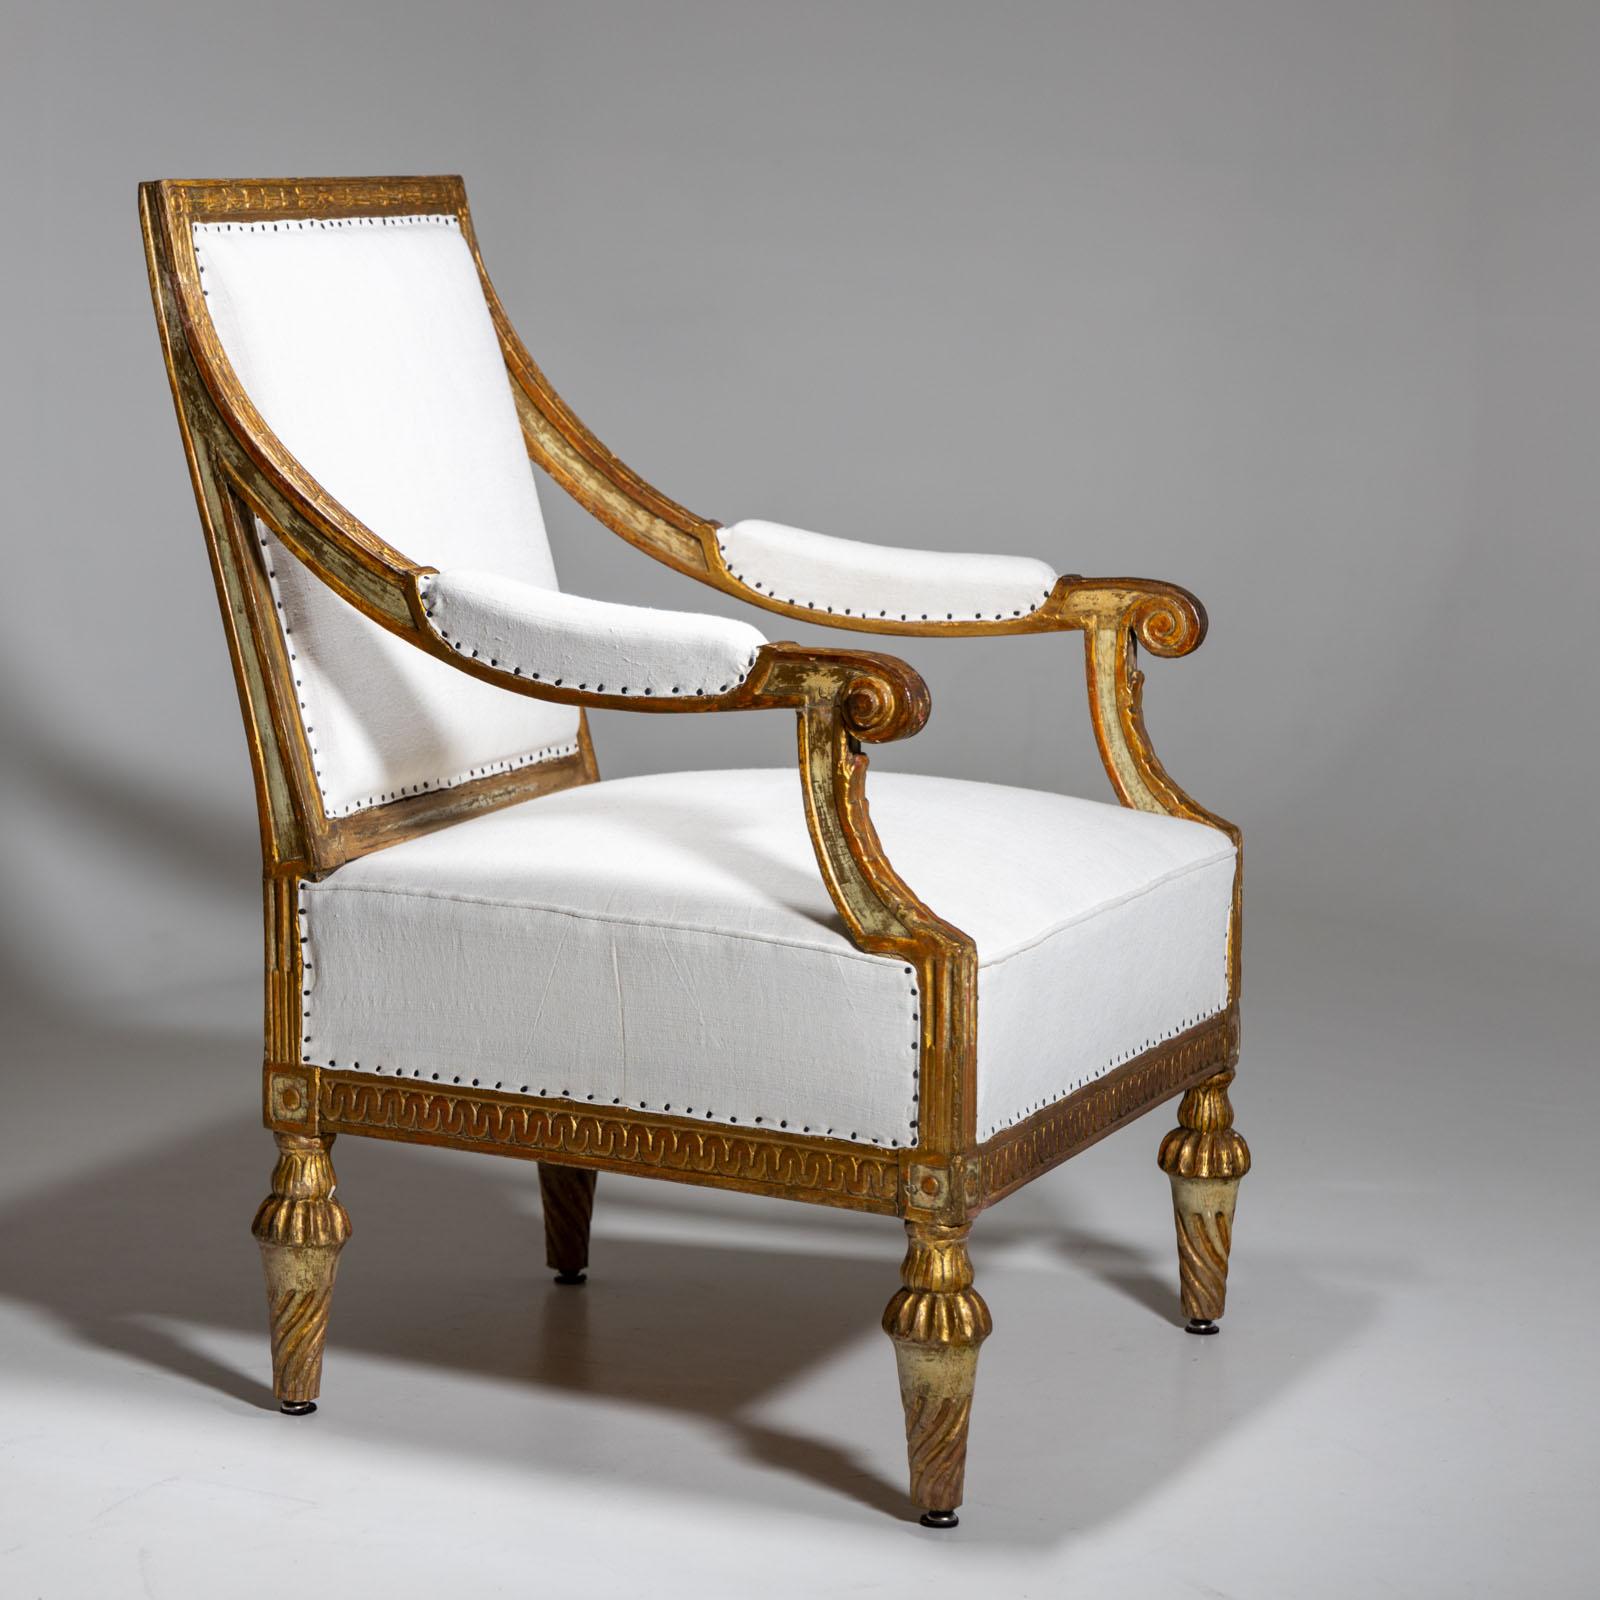 Patinated Gold-patinated armchair, around 1780 For Sale